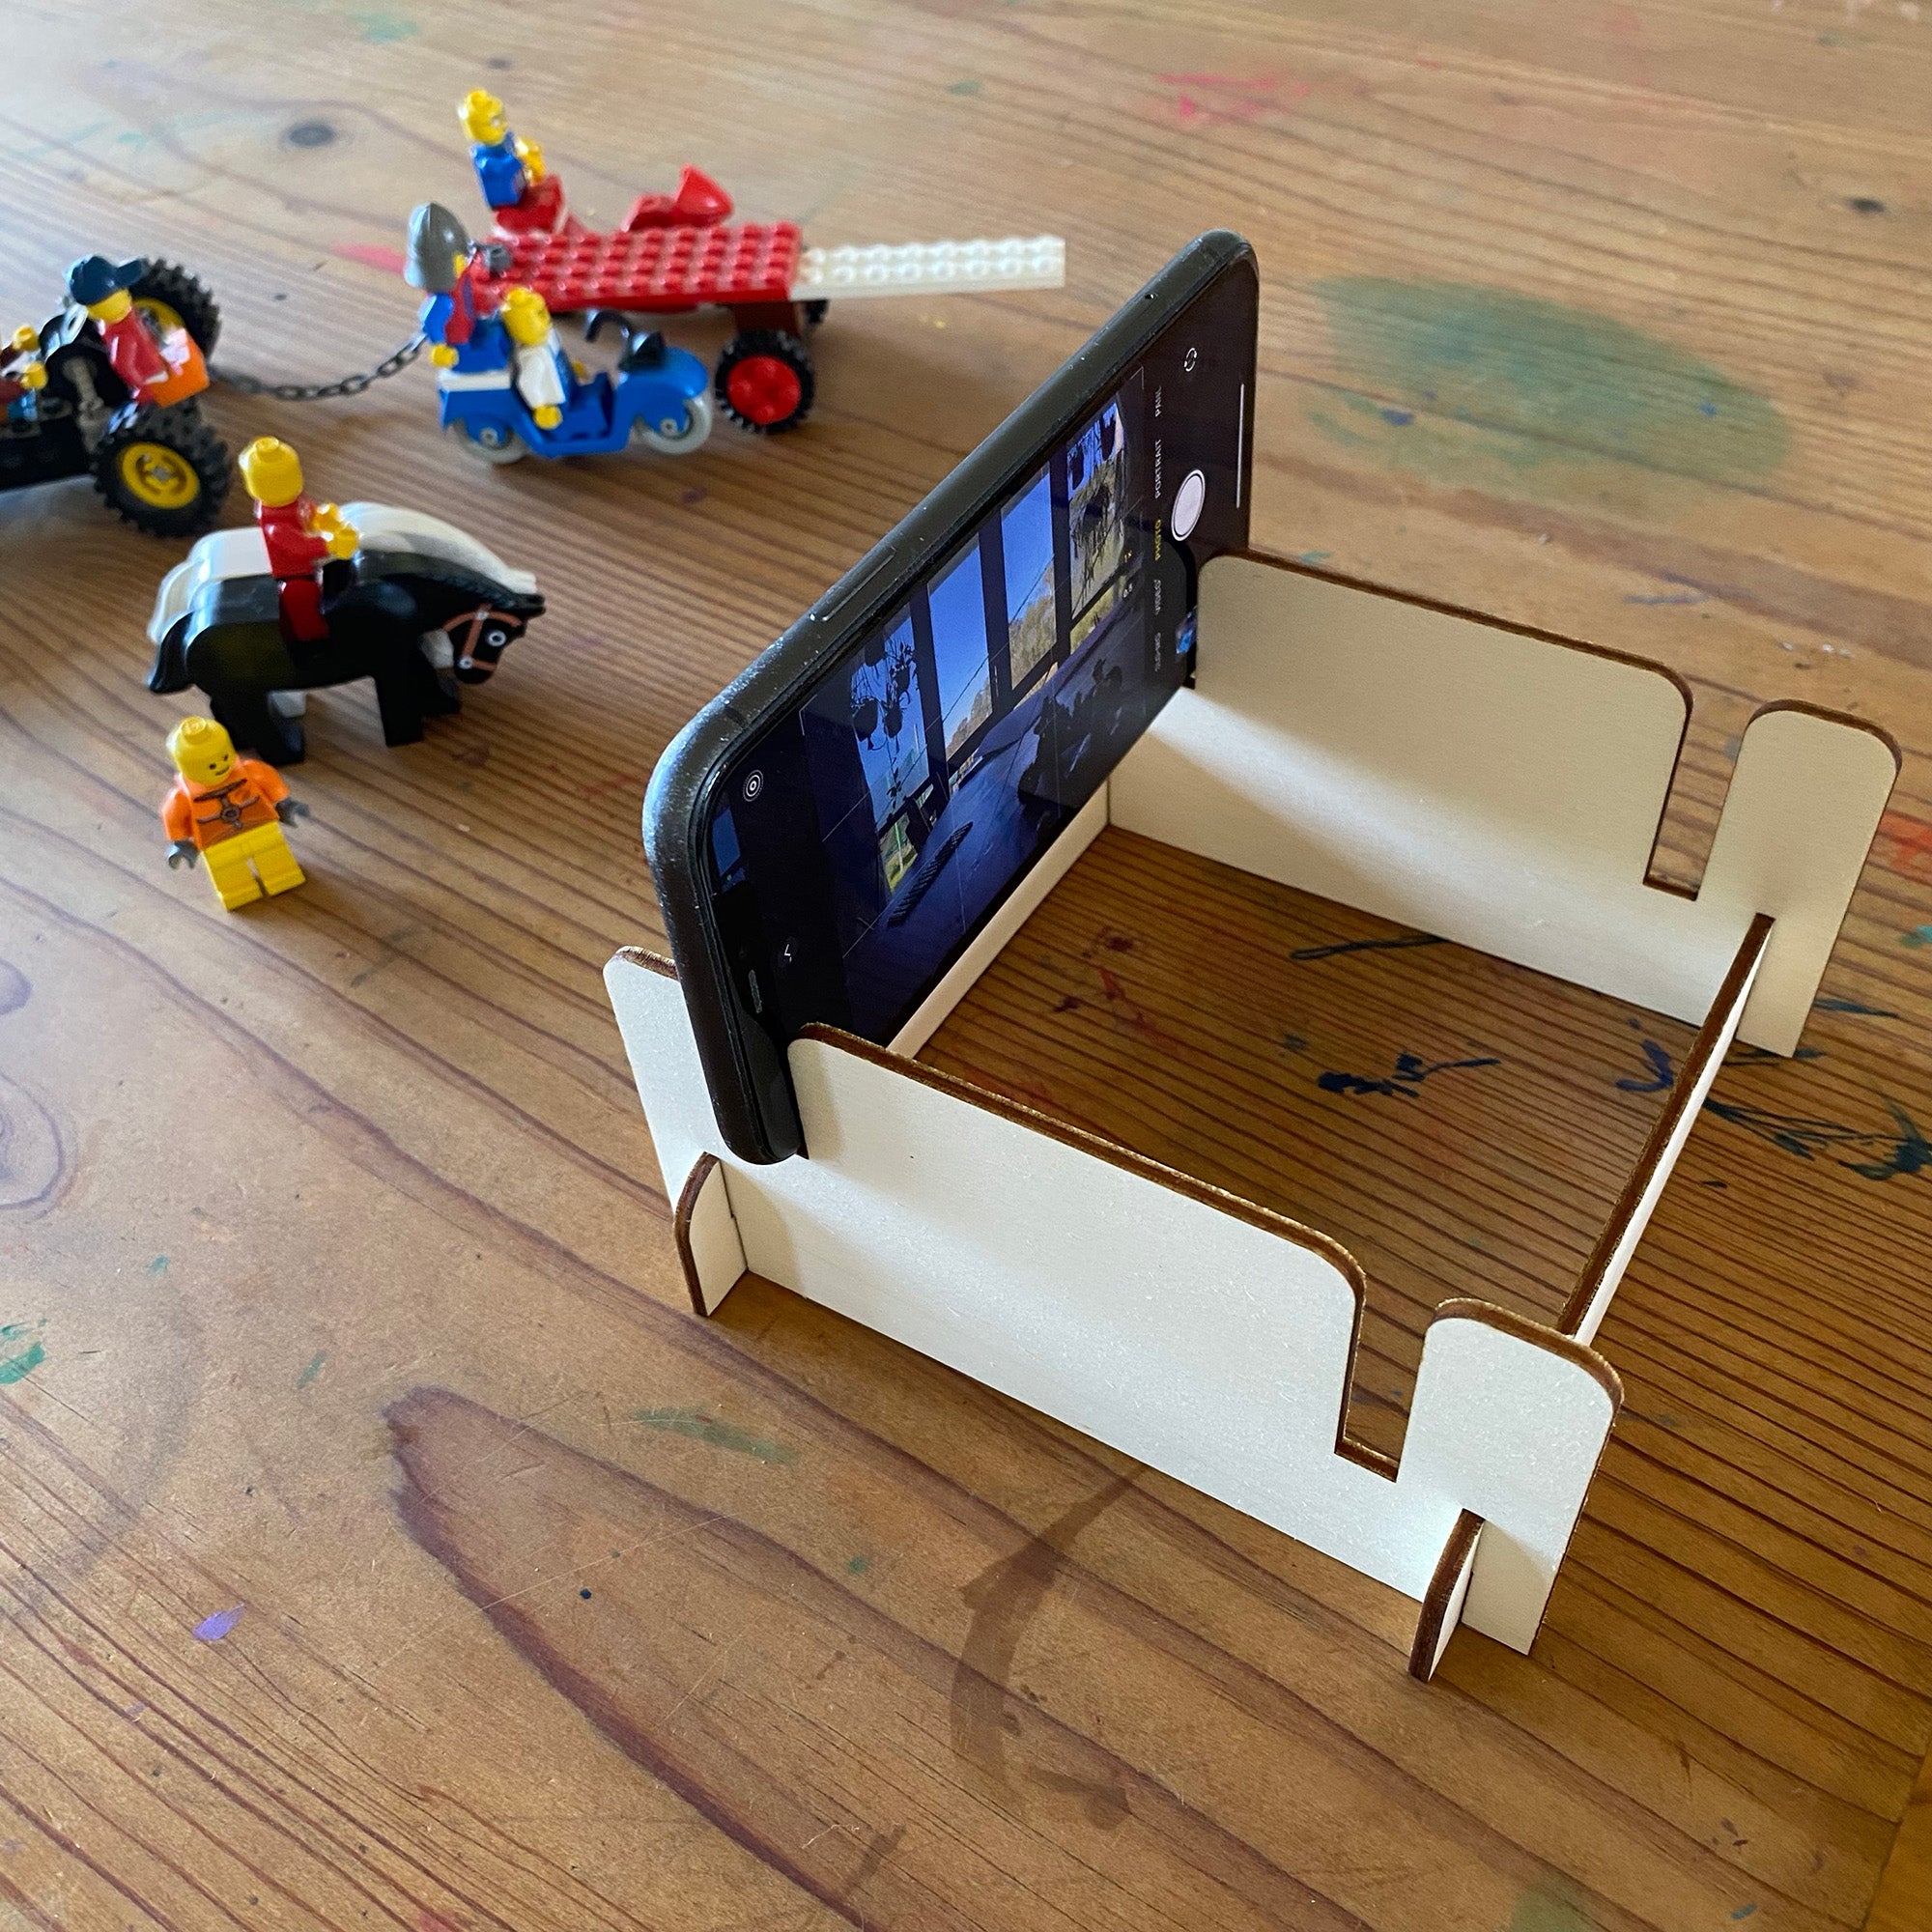 Phone or Tablet stand - Great for stop motion video!